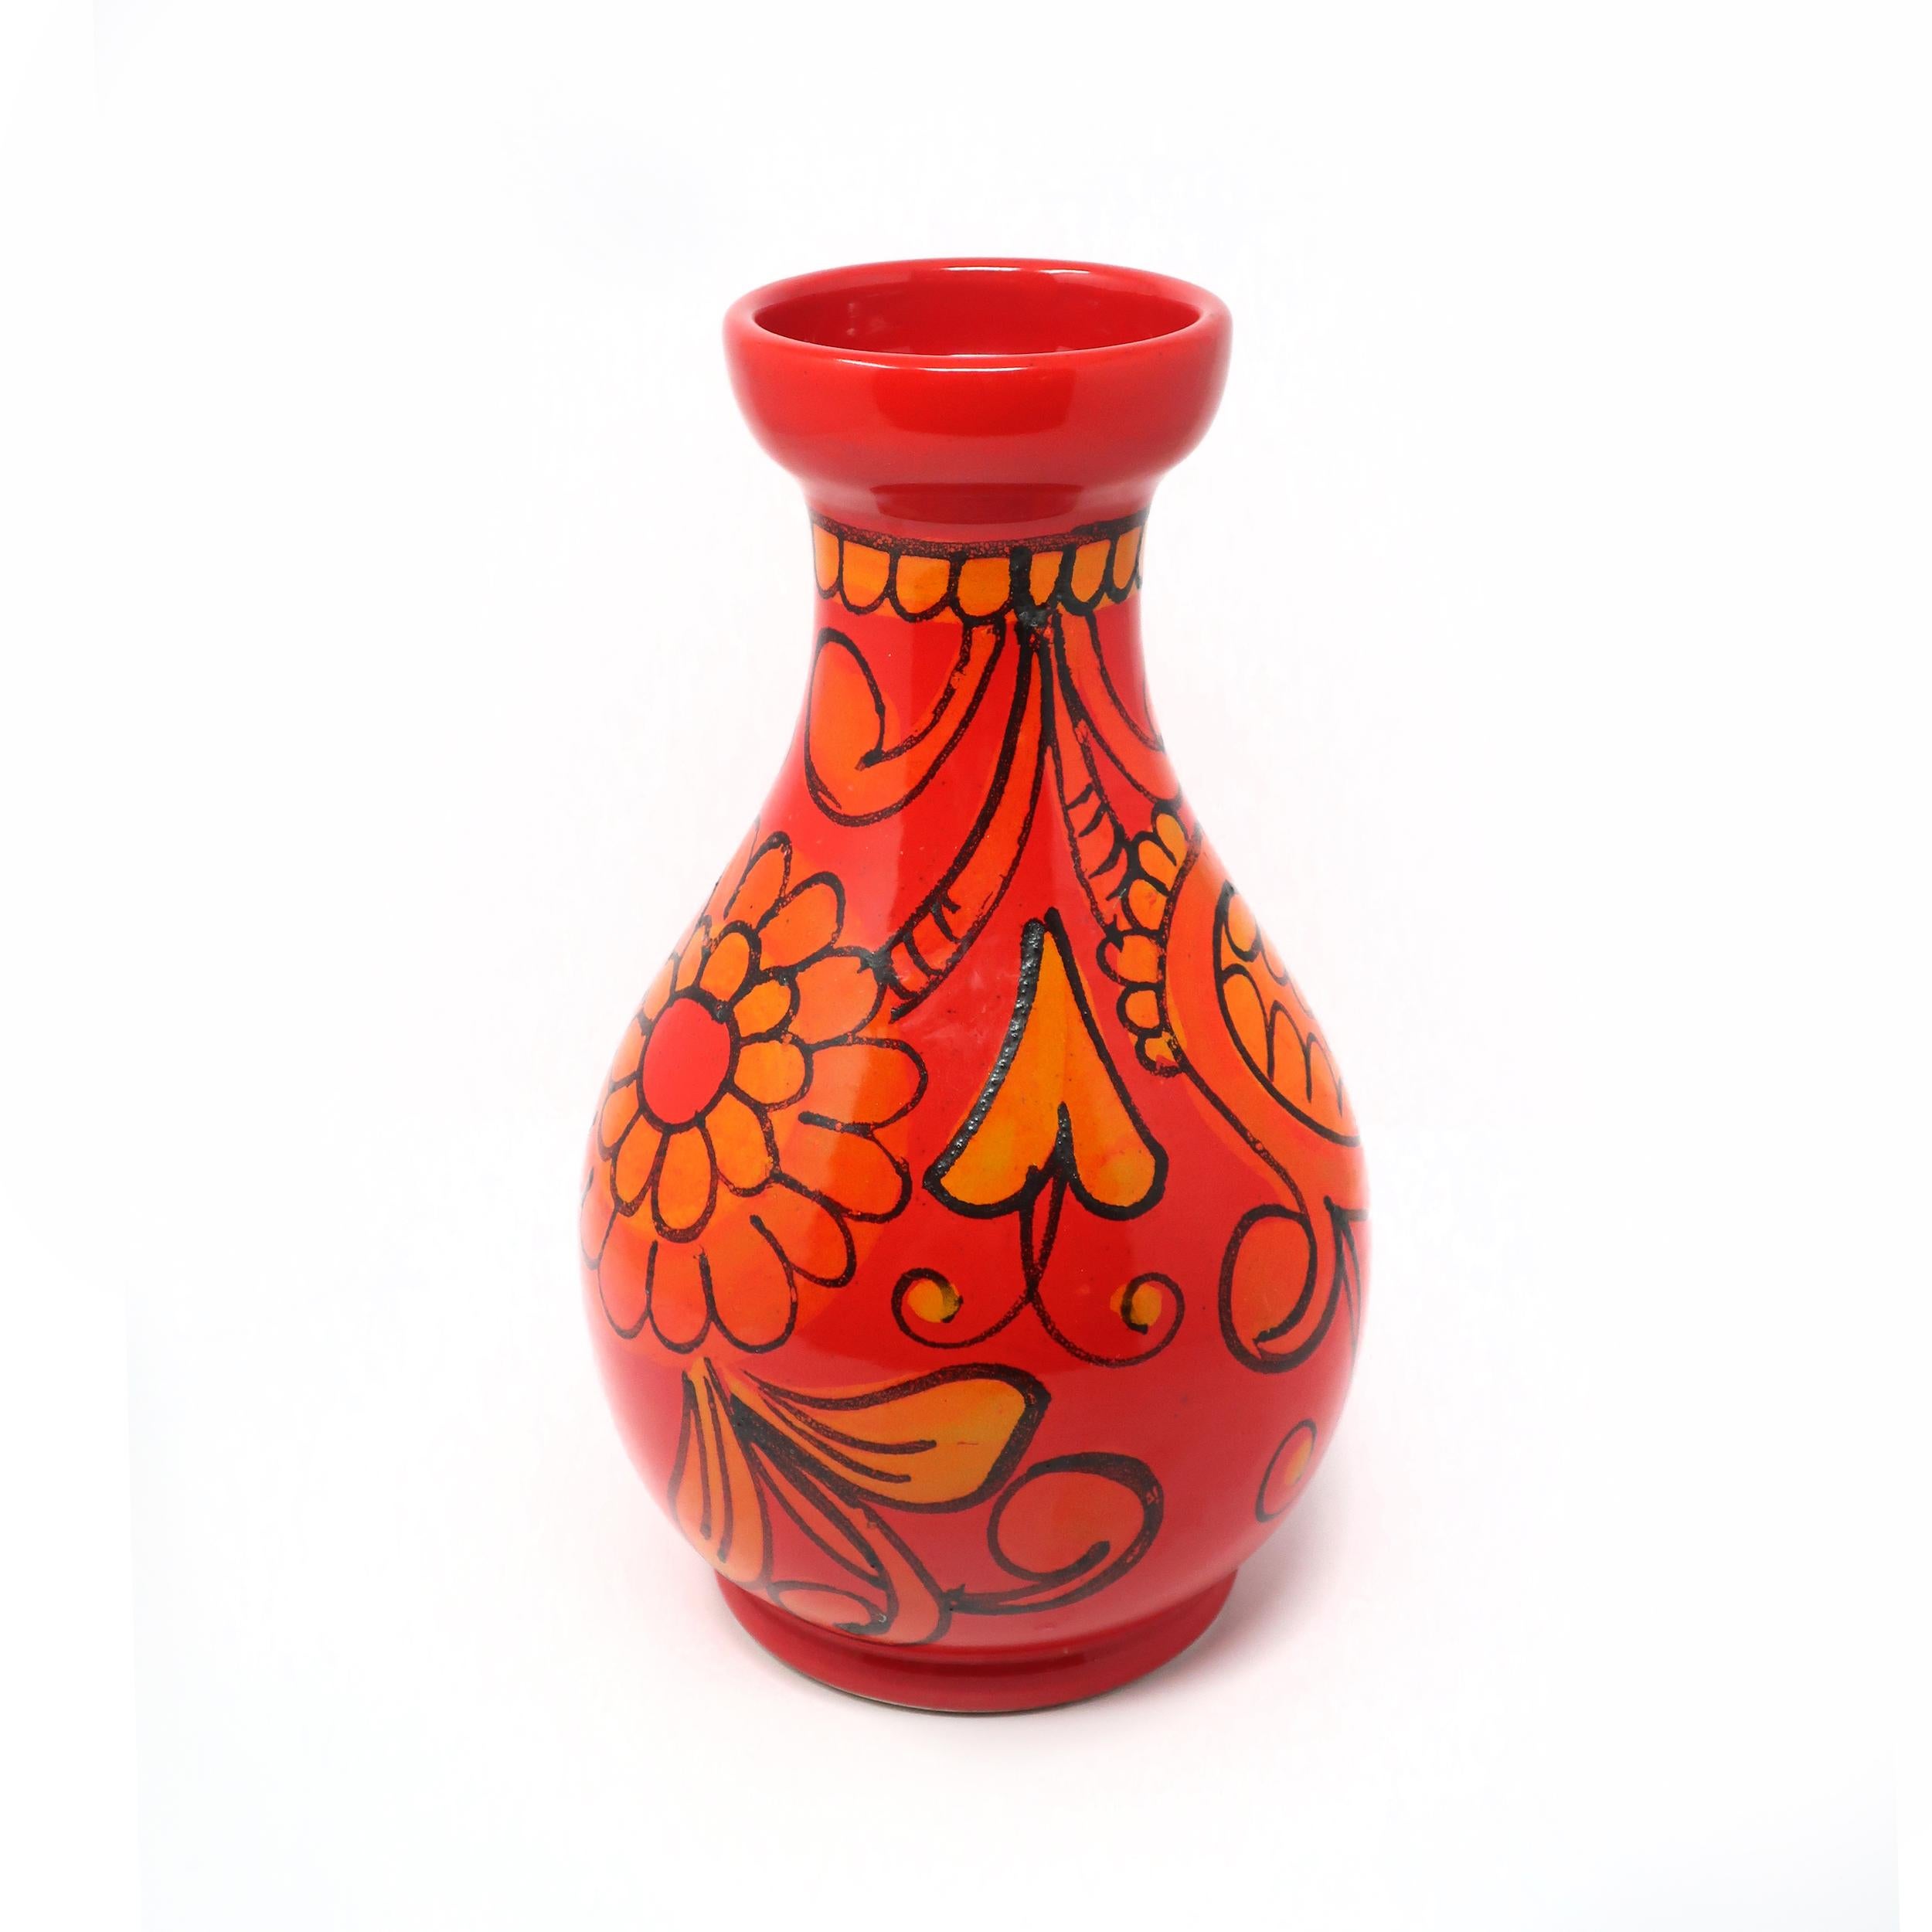 A mid-century modern Bitossi vase with red and orange glaze with raised accents of plants and flowers. 

Glaze is bright and in good vintage condition with wear consistent with age and use. Marked “X158/A Italy” on underside.

Measures: 7